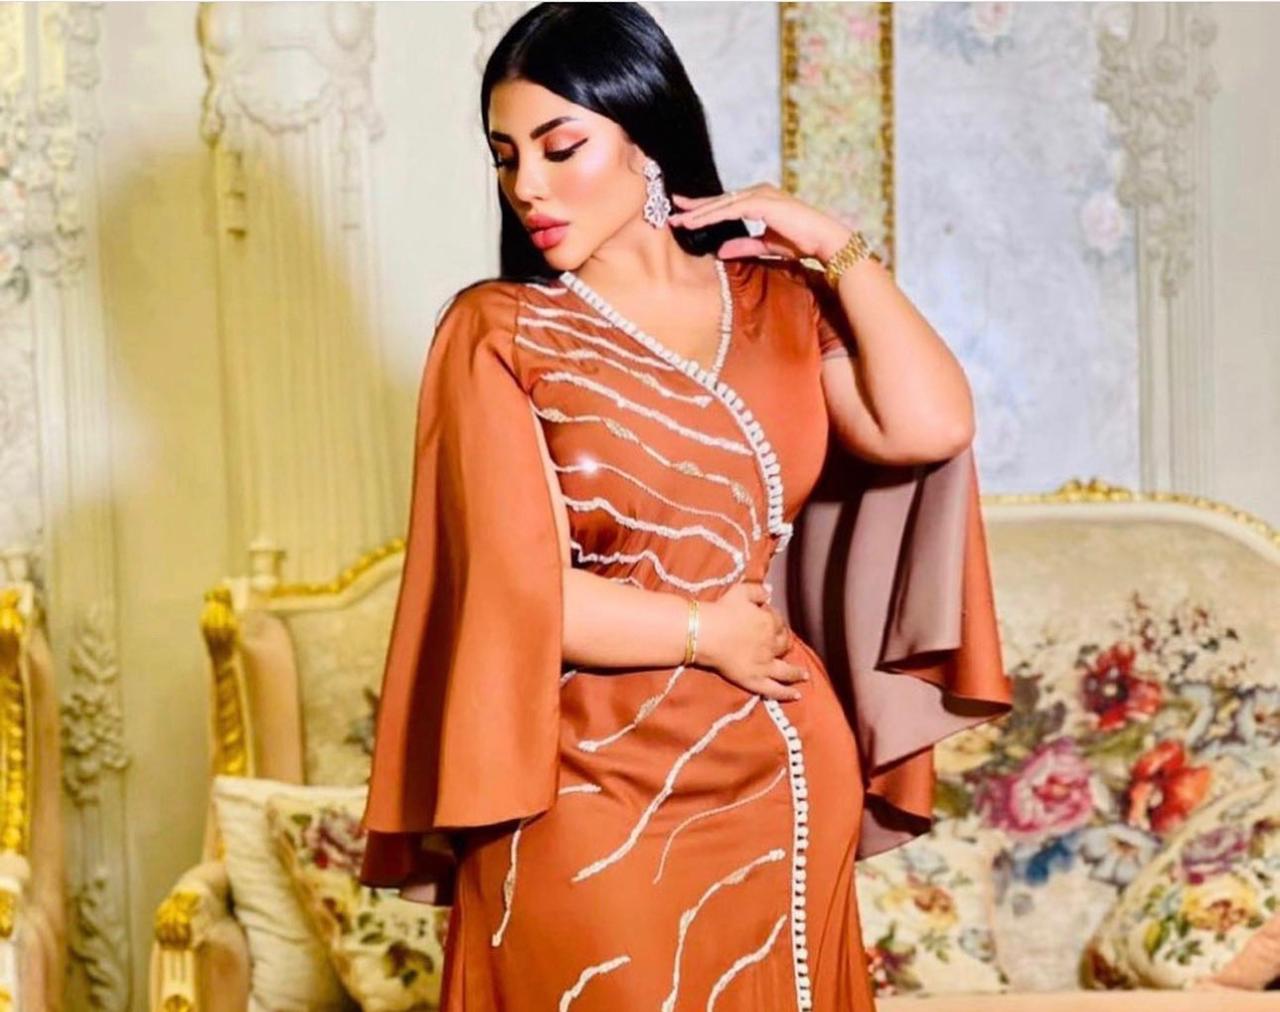 Safaa Radoua, one of the top modeling Instagram influencers